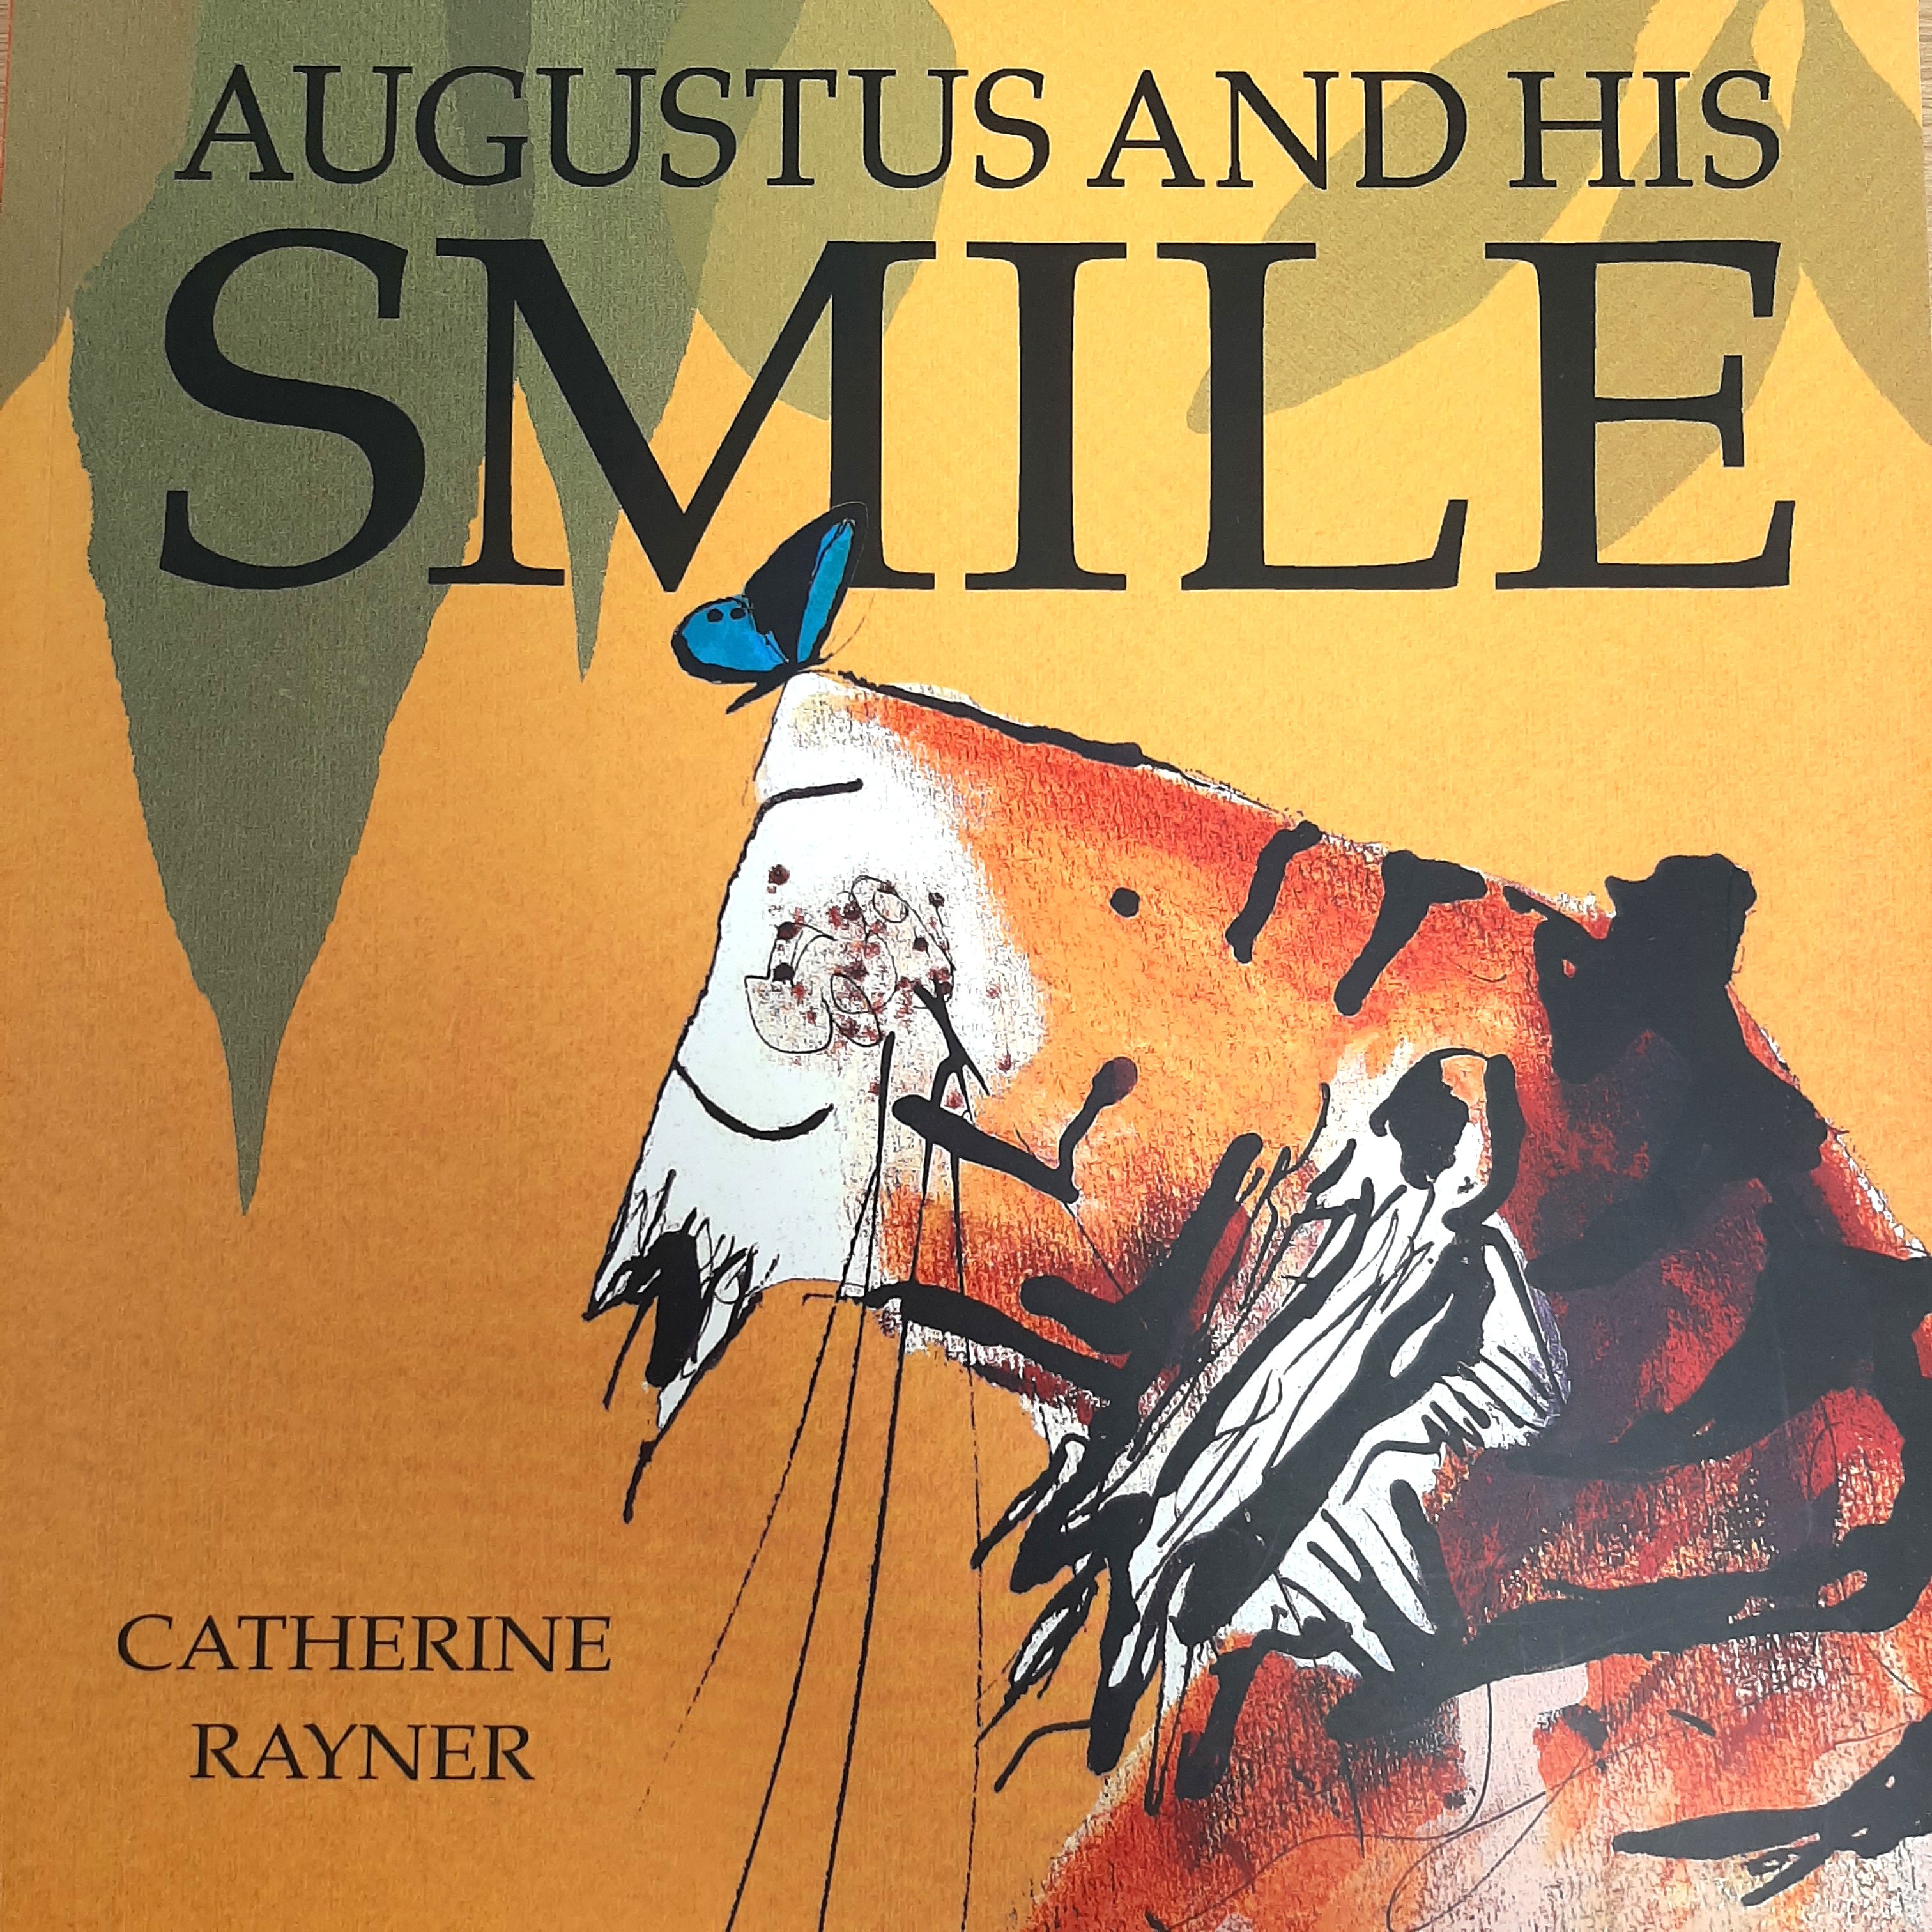 Augustus and his smile - image of book cover